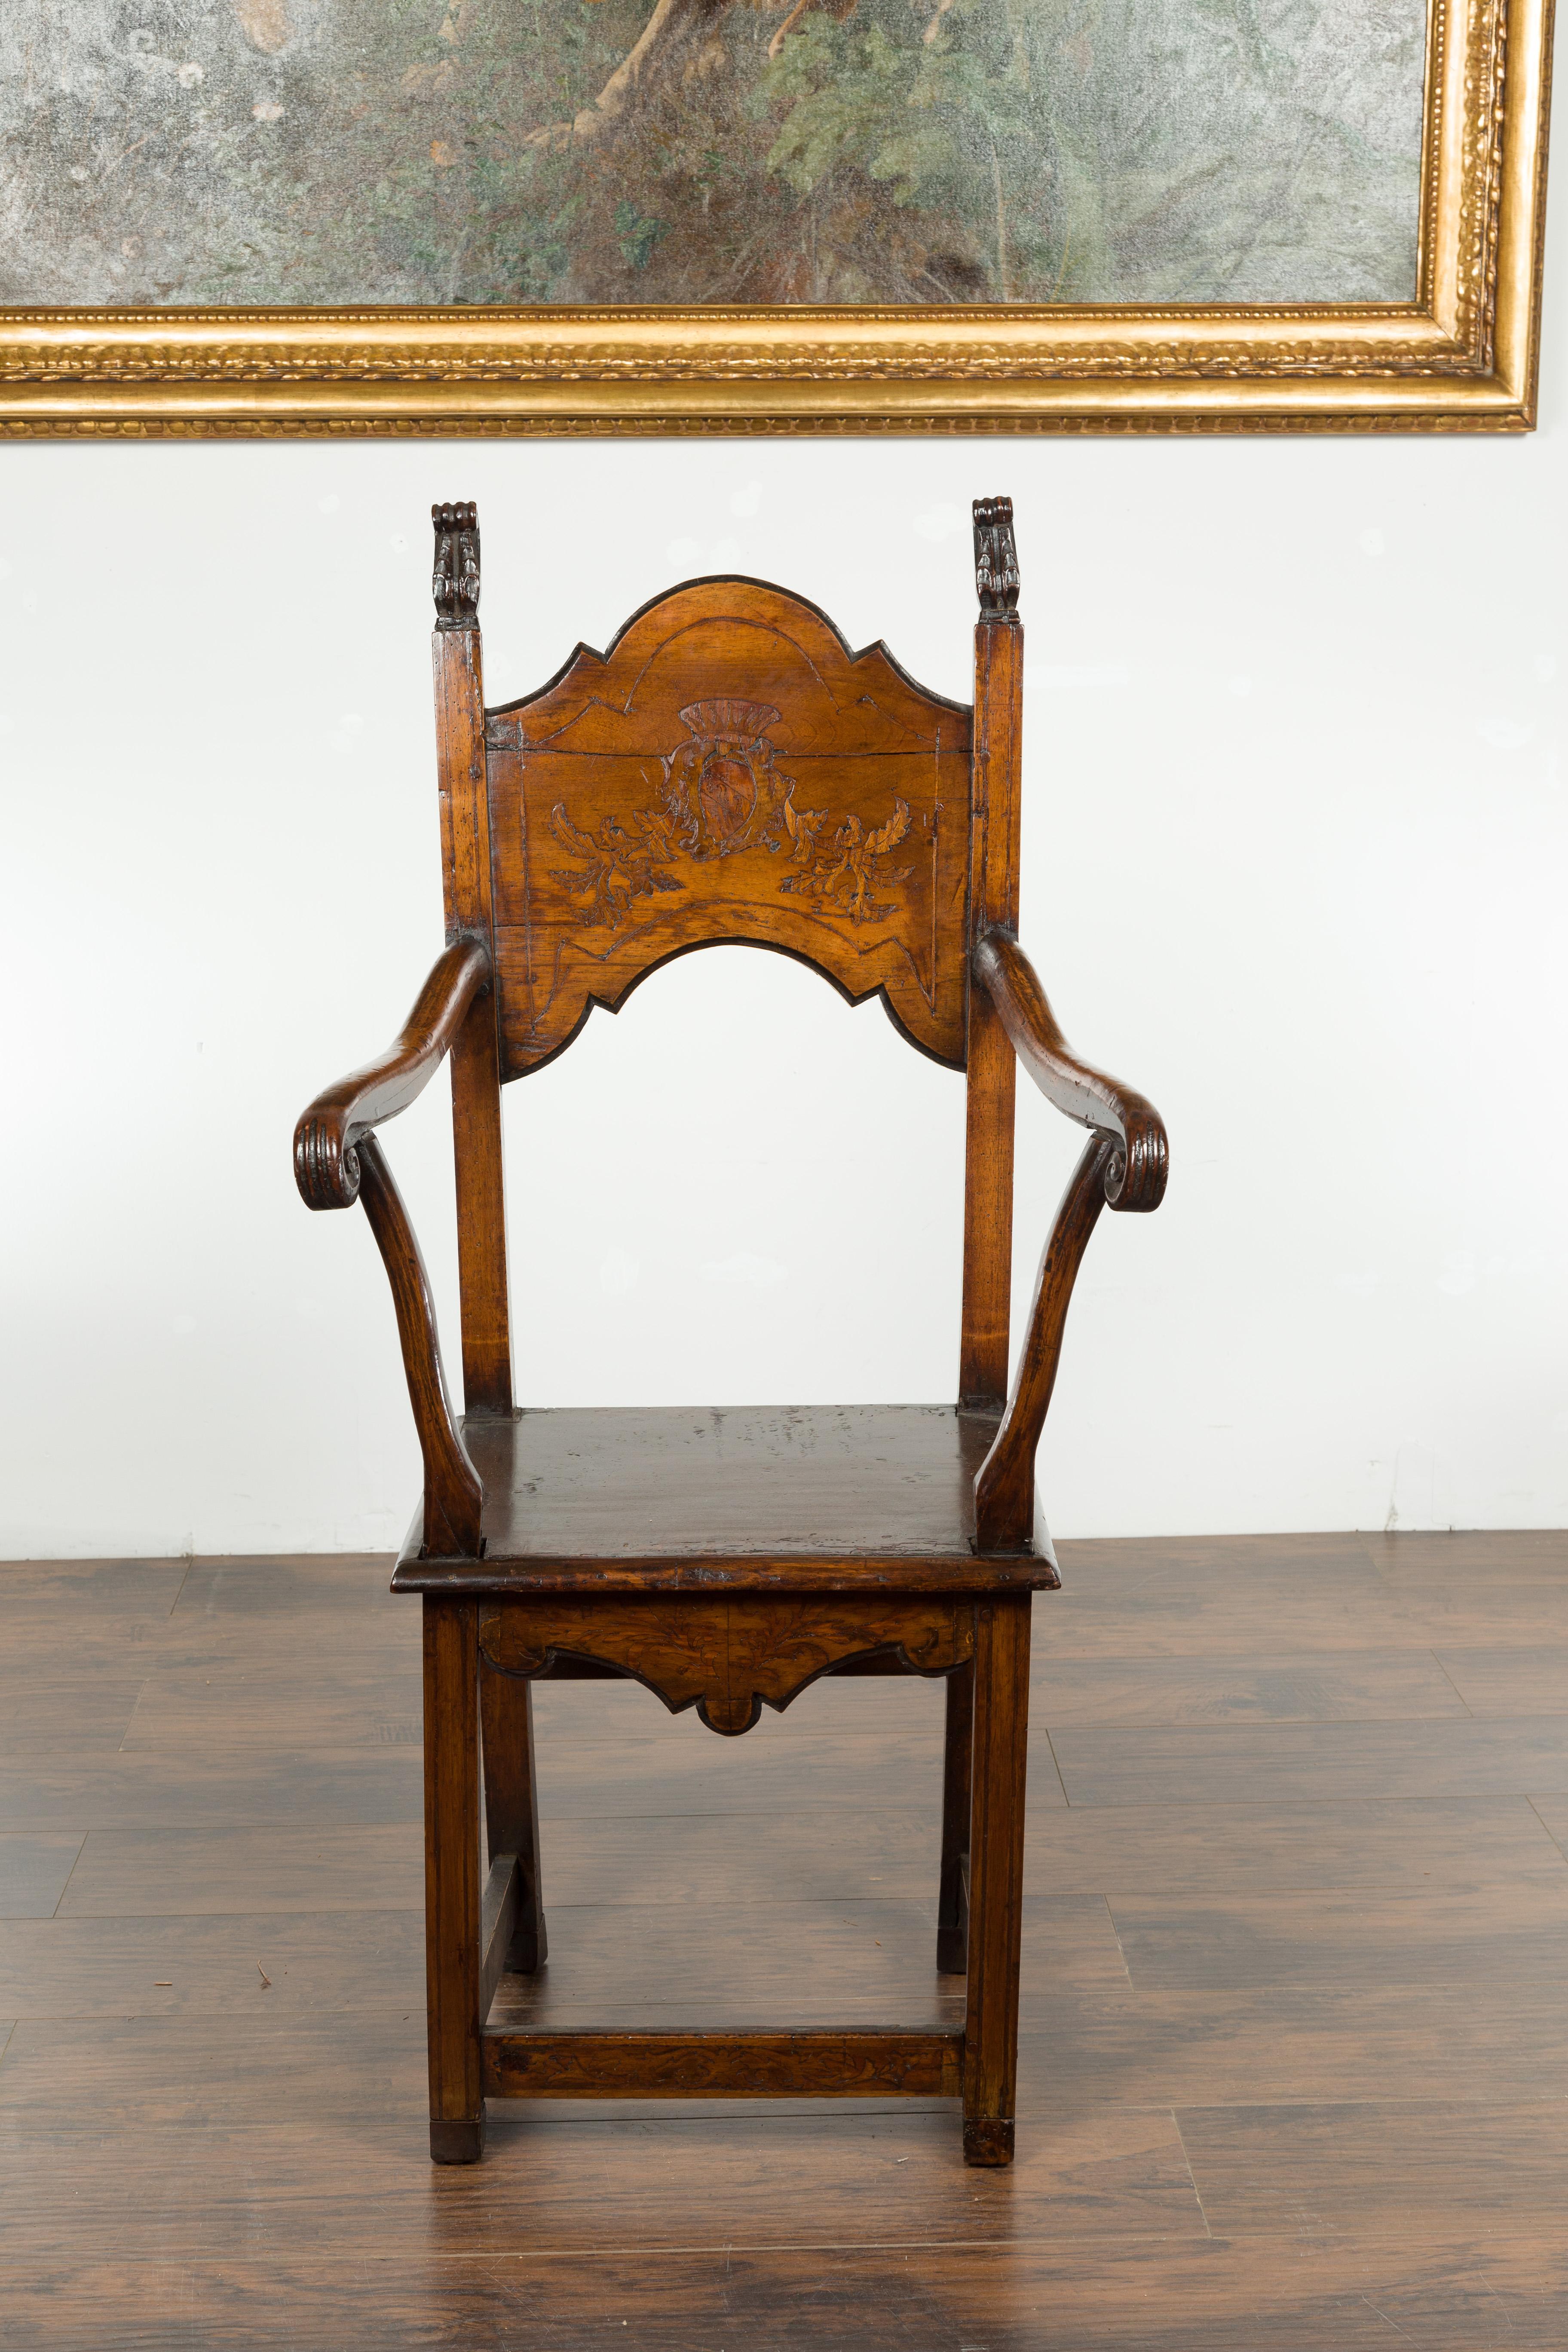 19th Century Tall English Georgian Wooden Armchair with Carved Cartouche, circa 1800-1820